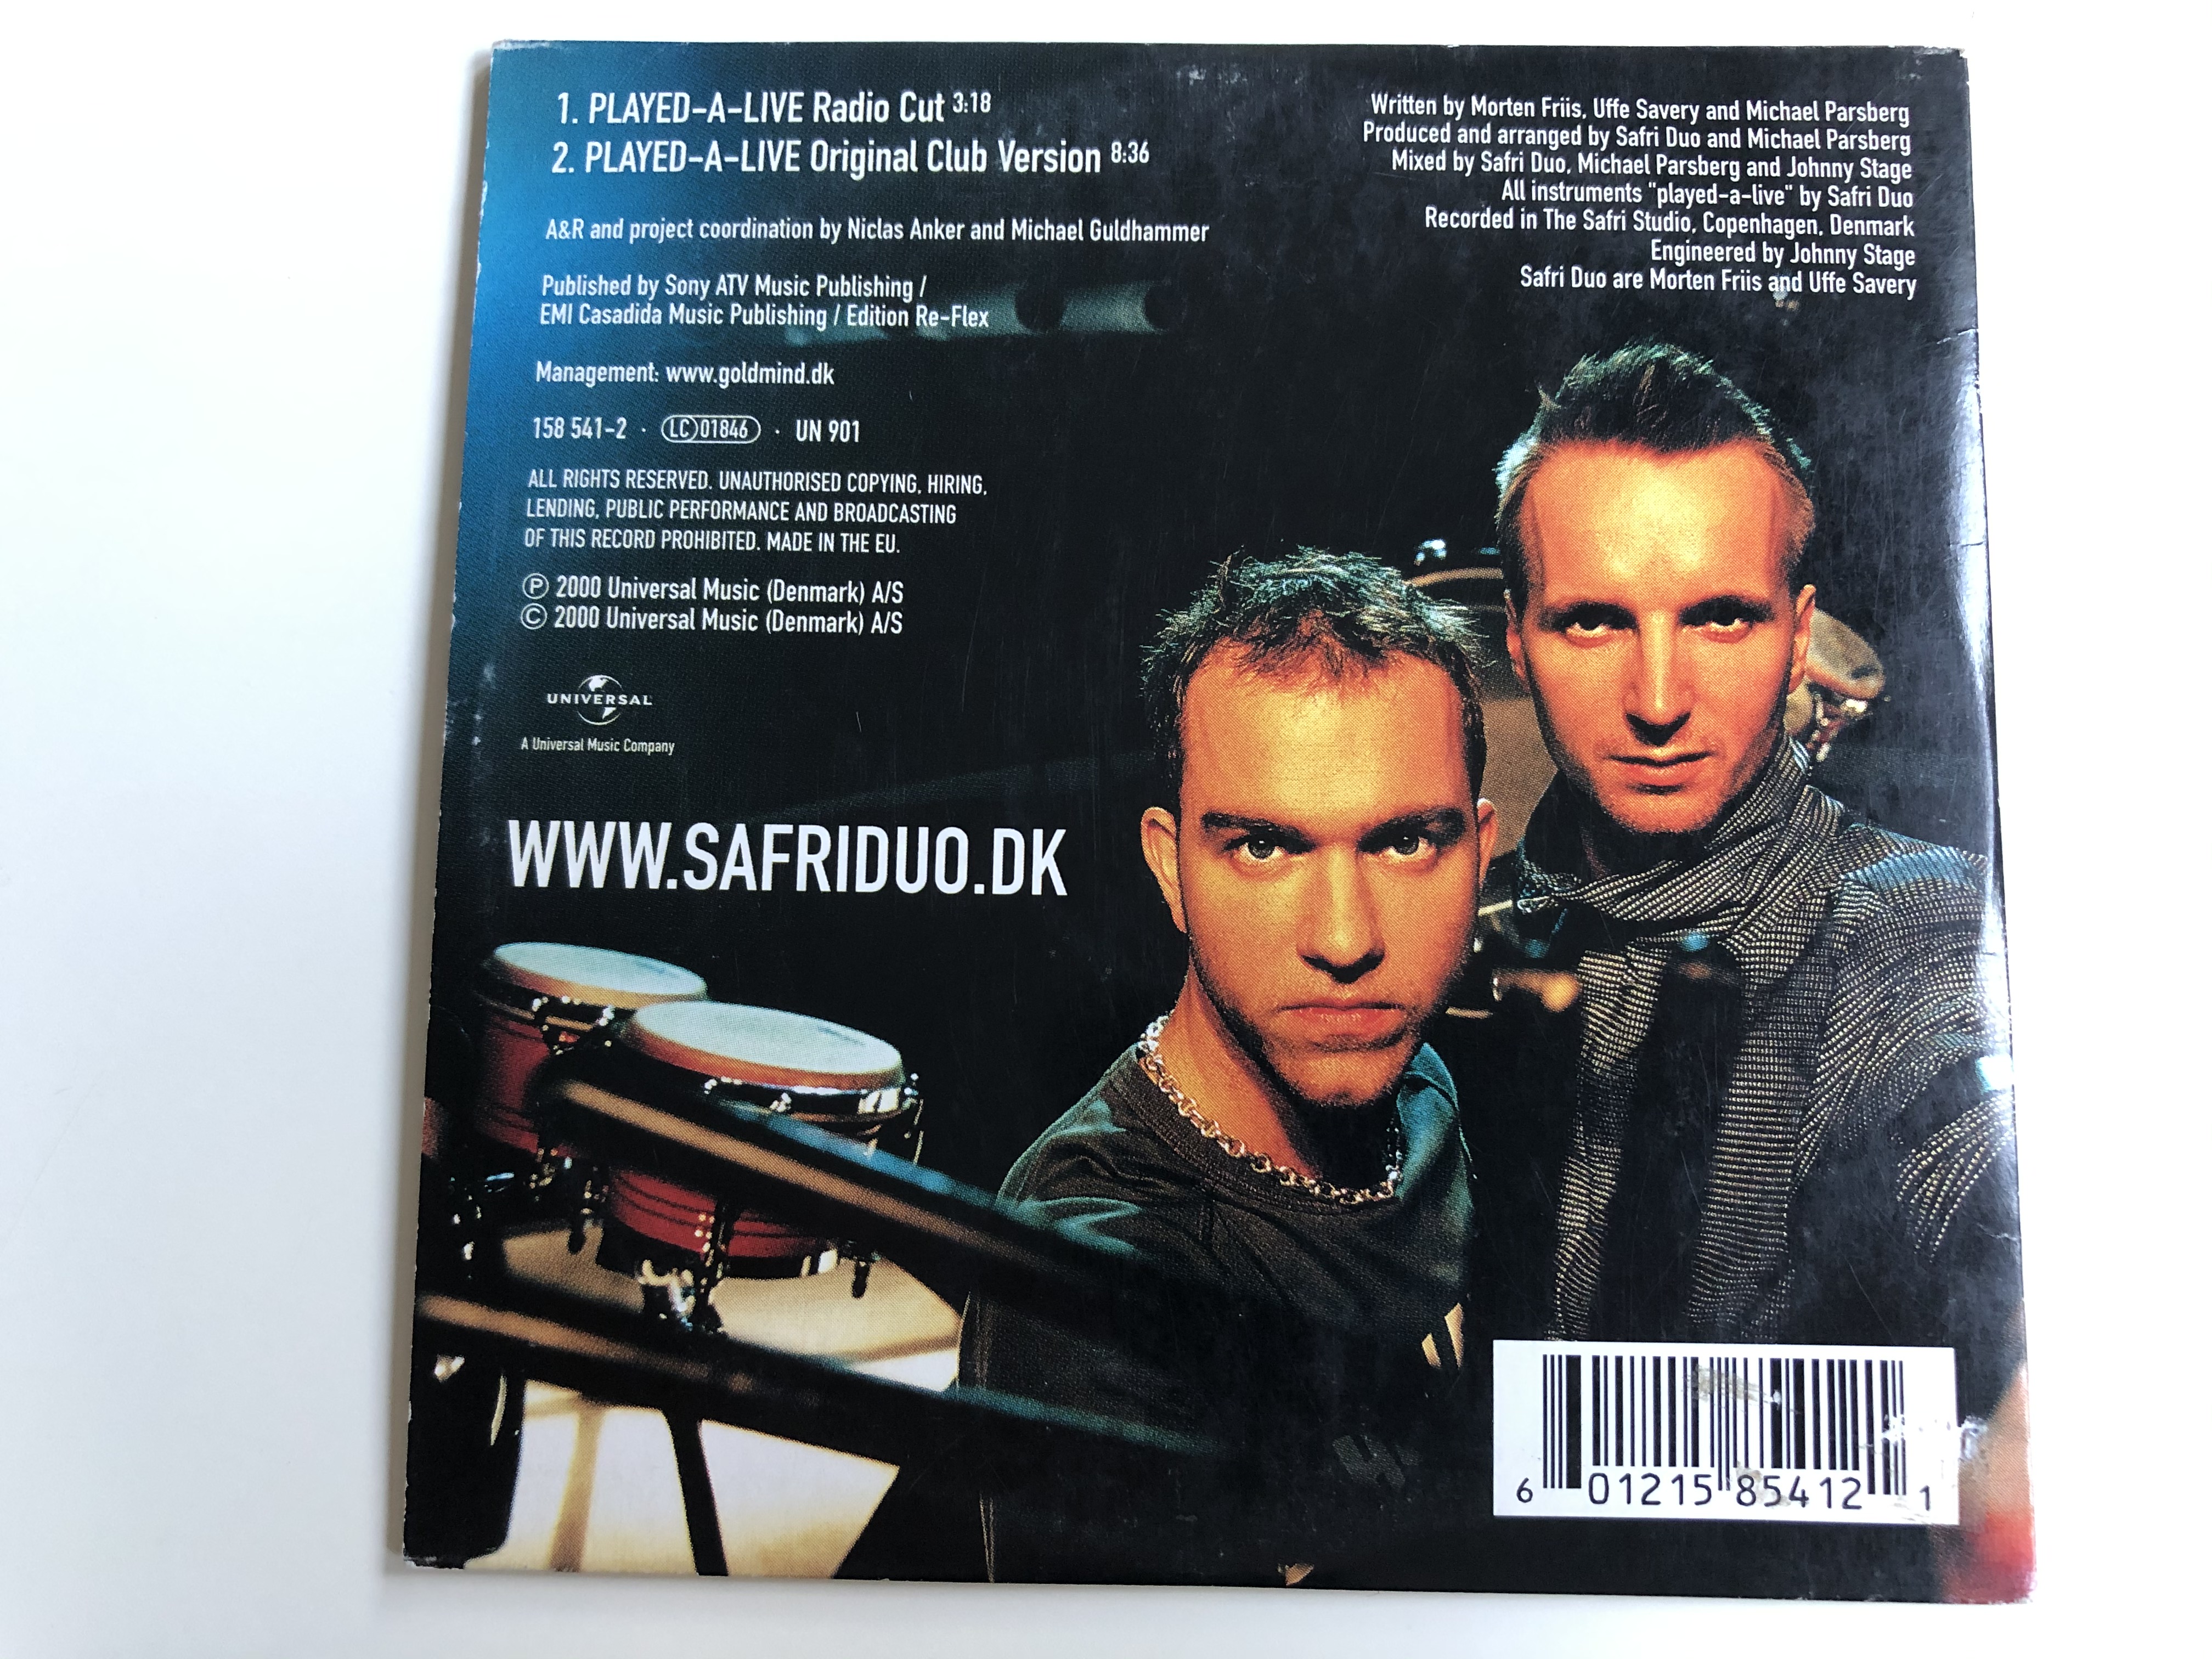 safri-duo-played-a-live-the-bongo-song-universal-audio-cd-2000-158-541-2-3-.jpg